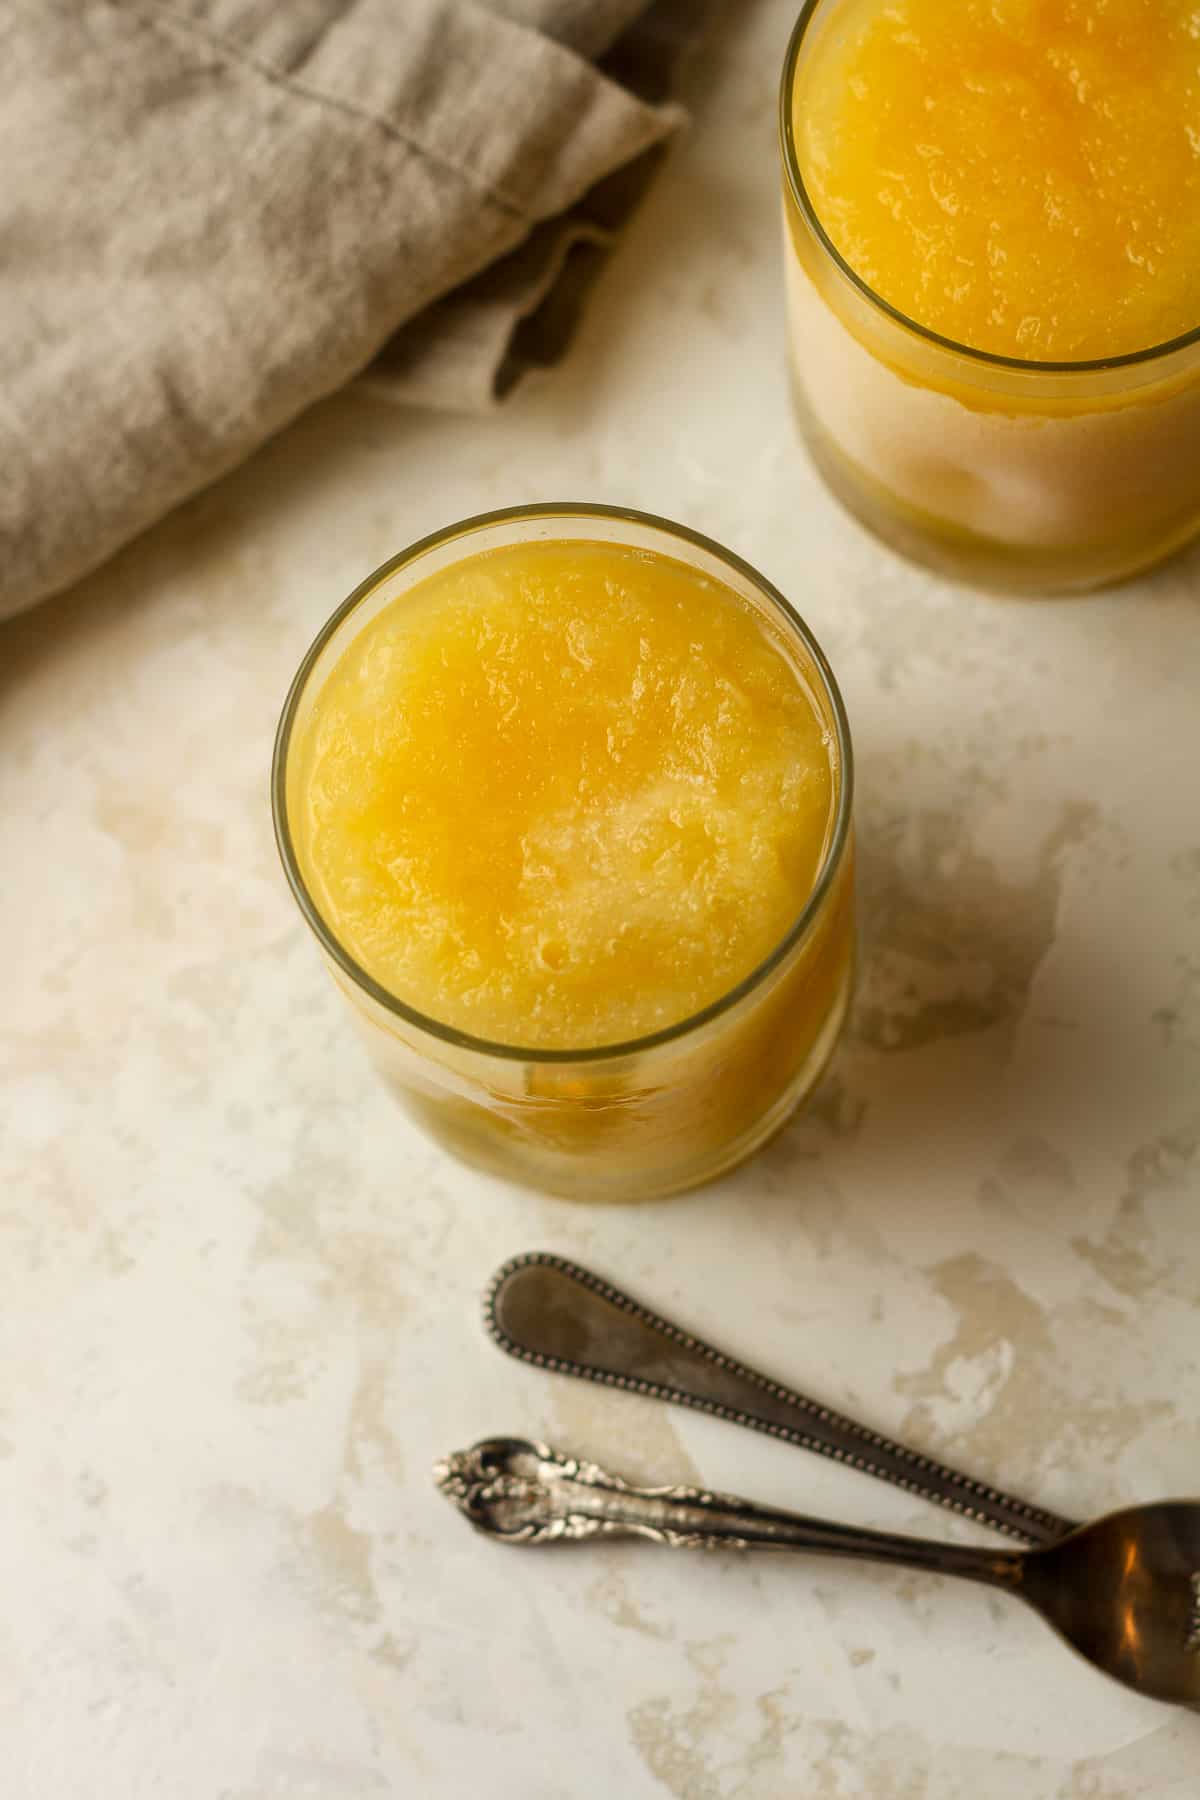 Two slushies made with vodka and orange juice concentrate.